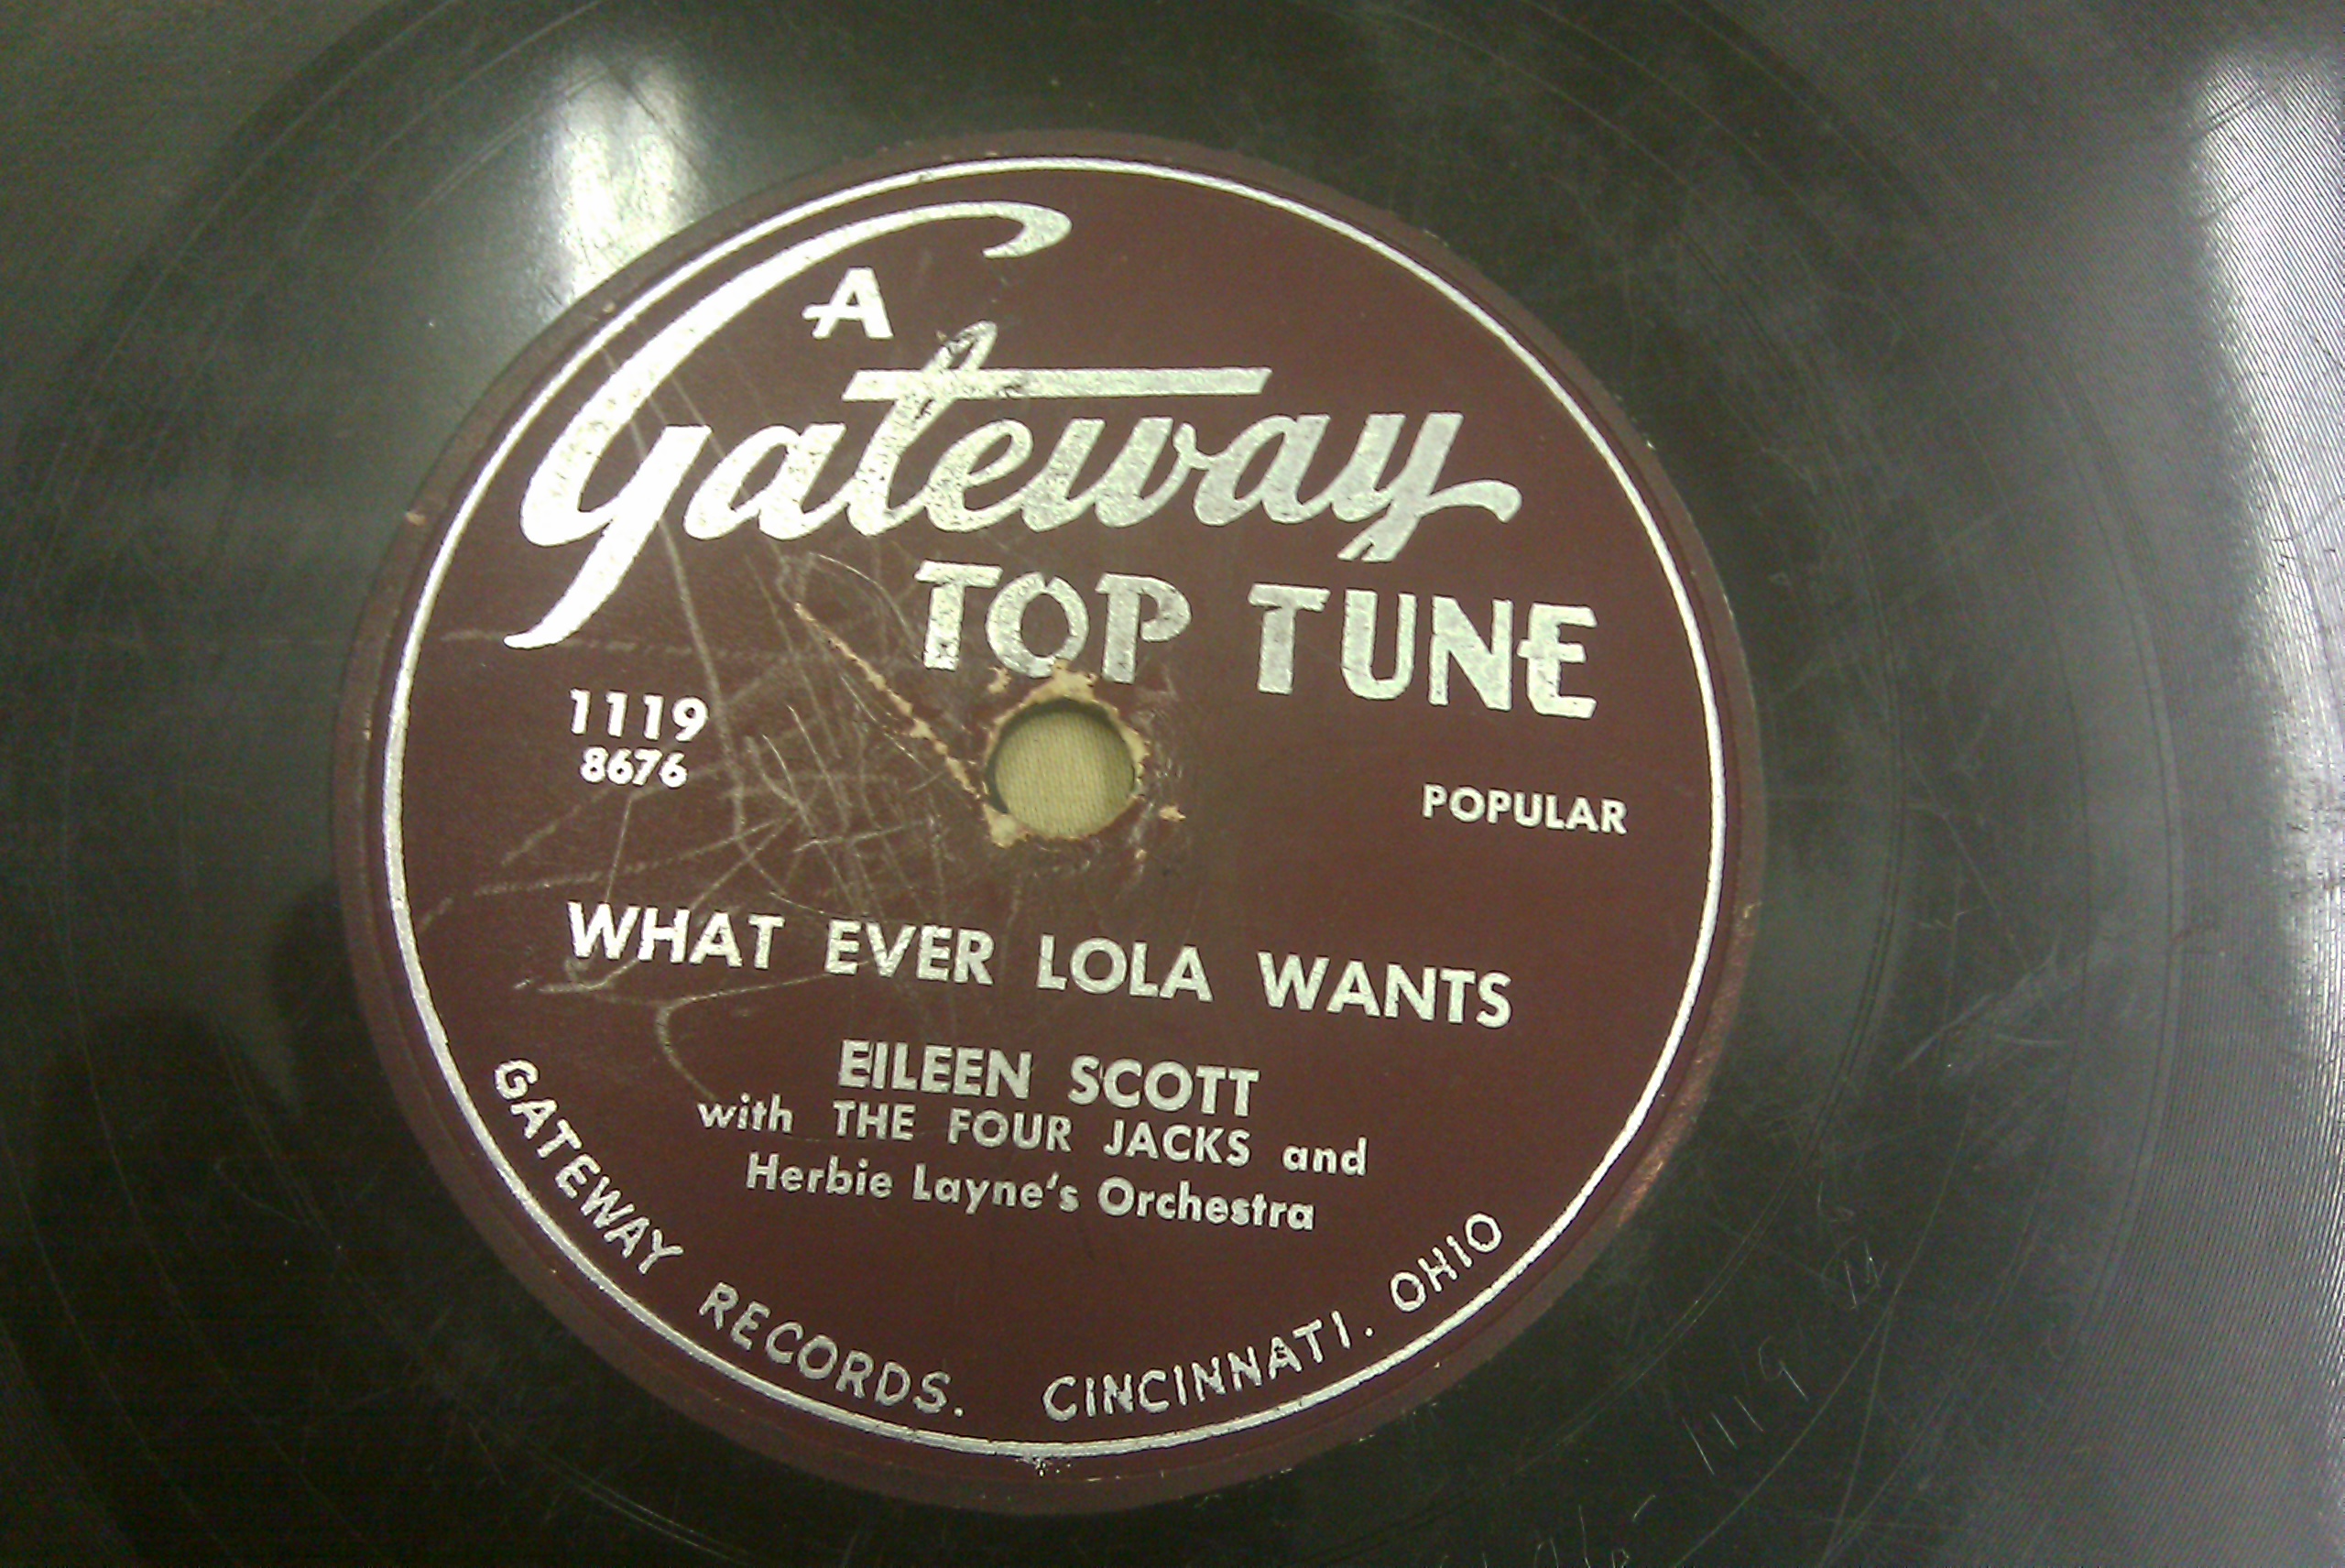 1119 GATEWAY TOP TUNE 78 RECORD TWO HEARTS - BOB VANCE & EILEEN SCOTT – WHAT EVER LOLA WANTS